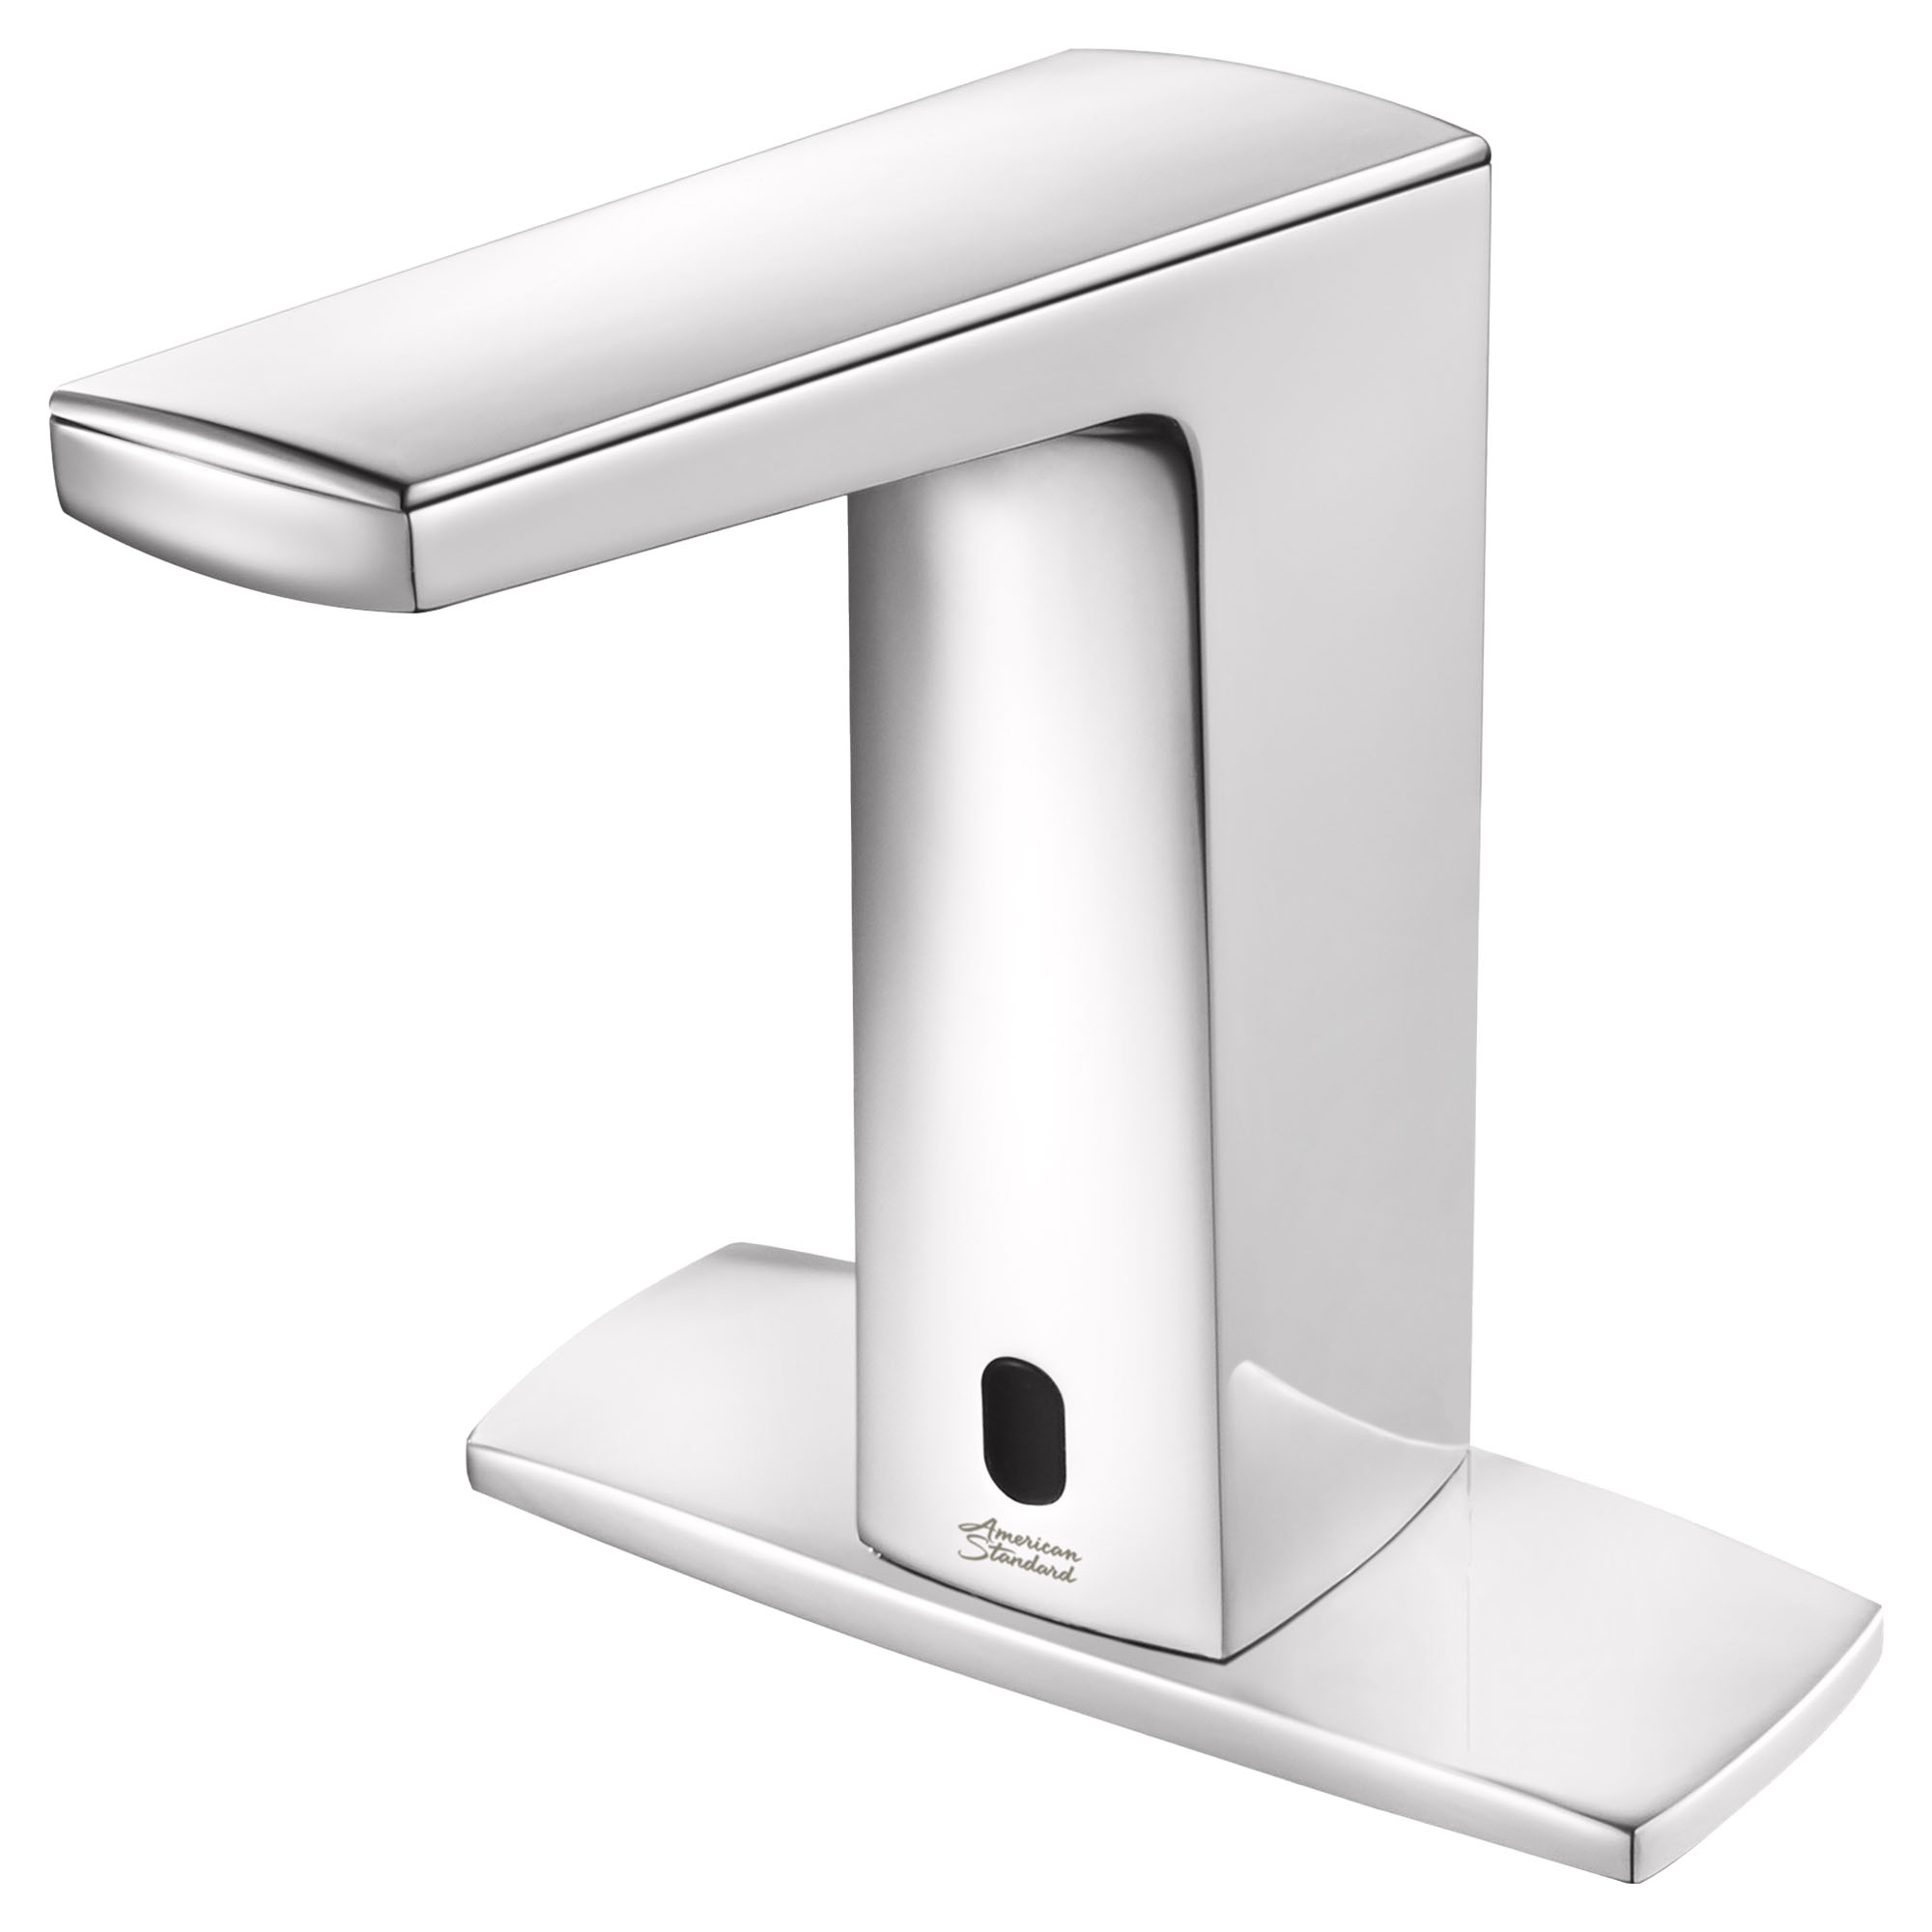 Paradigm® Selectronic® Touchless Faucet, Base Model, 1.5 gpm/5.7 Lpm